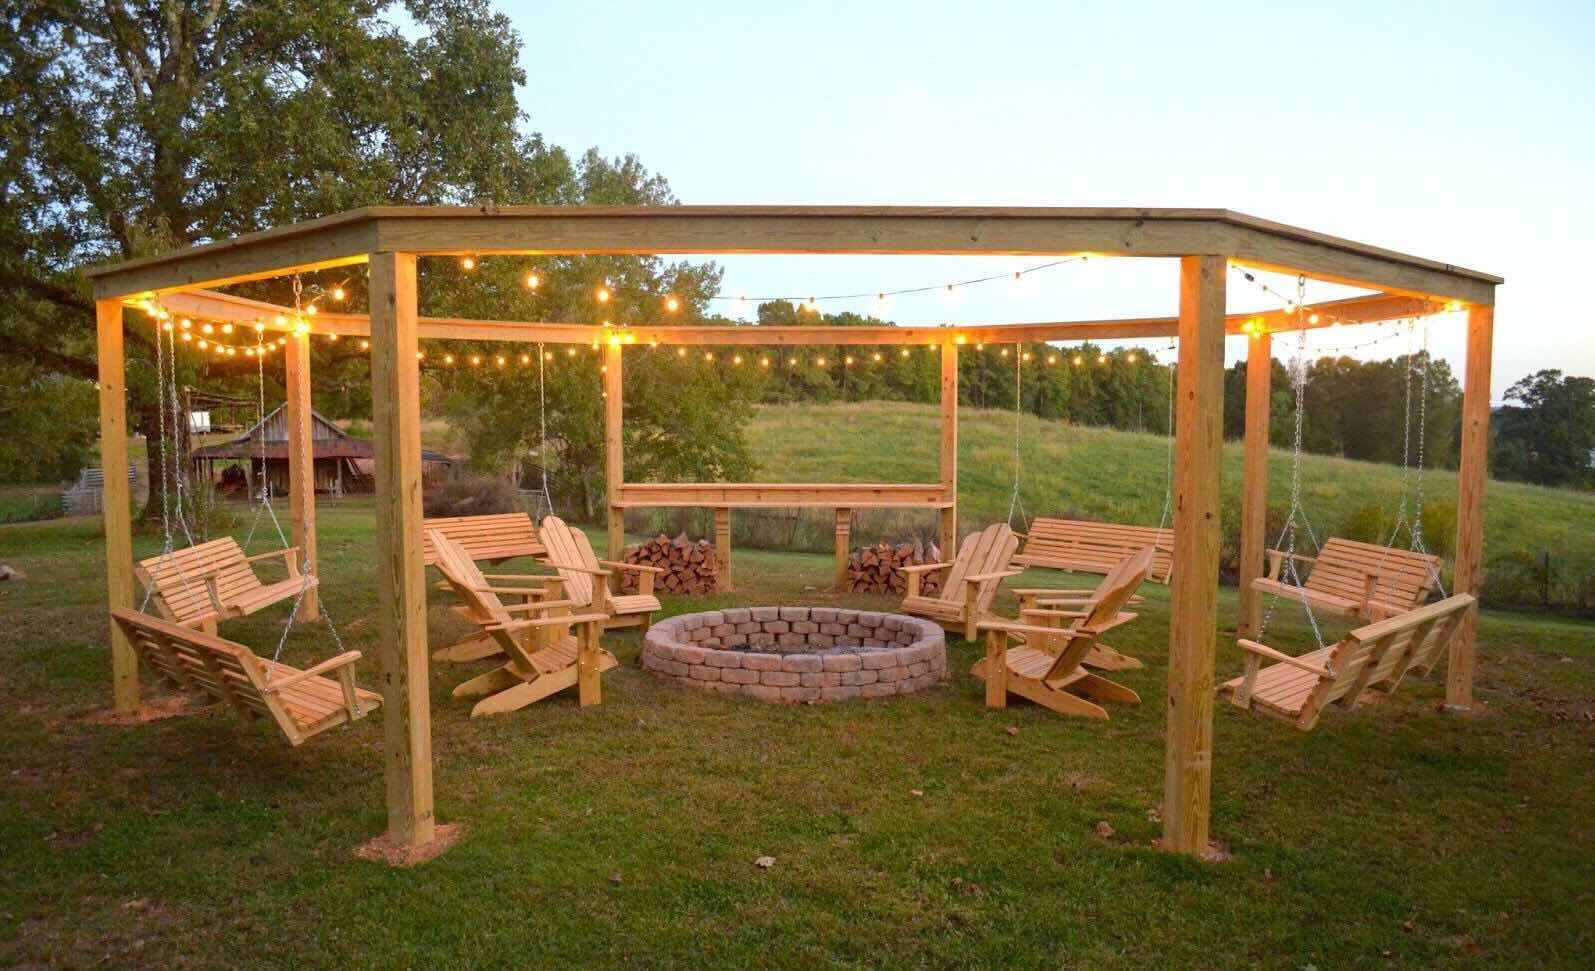 How To Build A Gazebo Over A Fire Pit